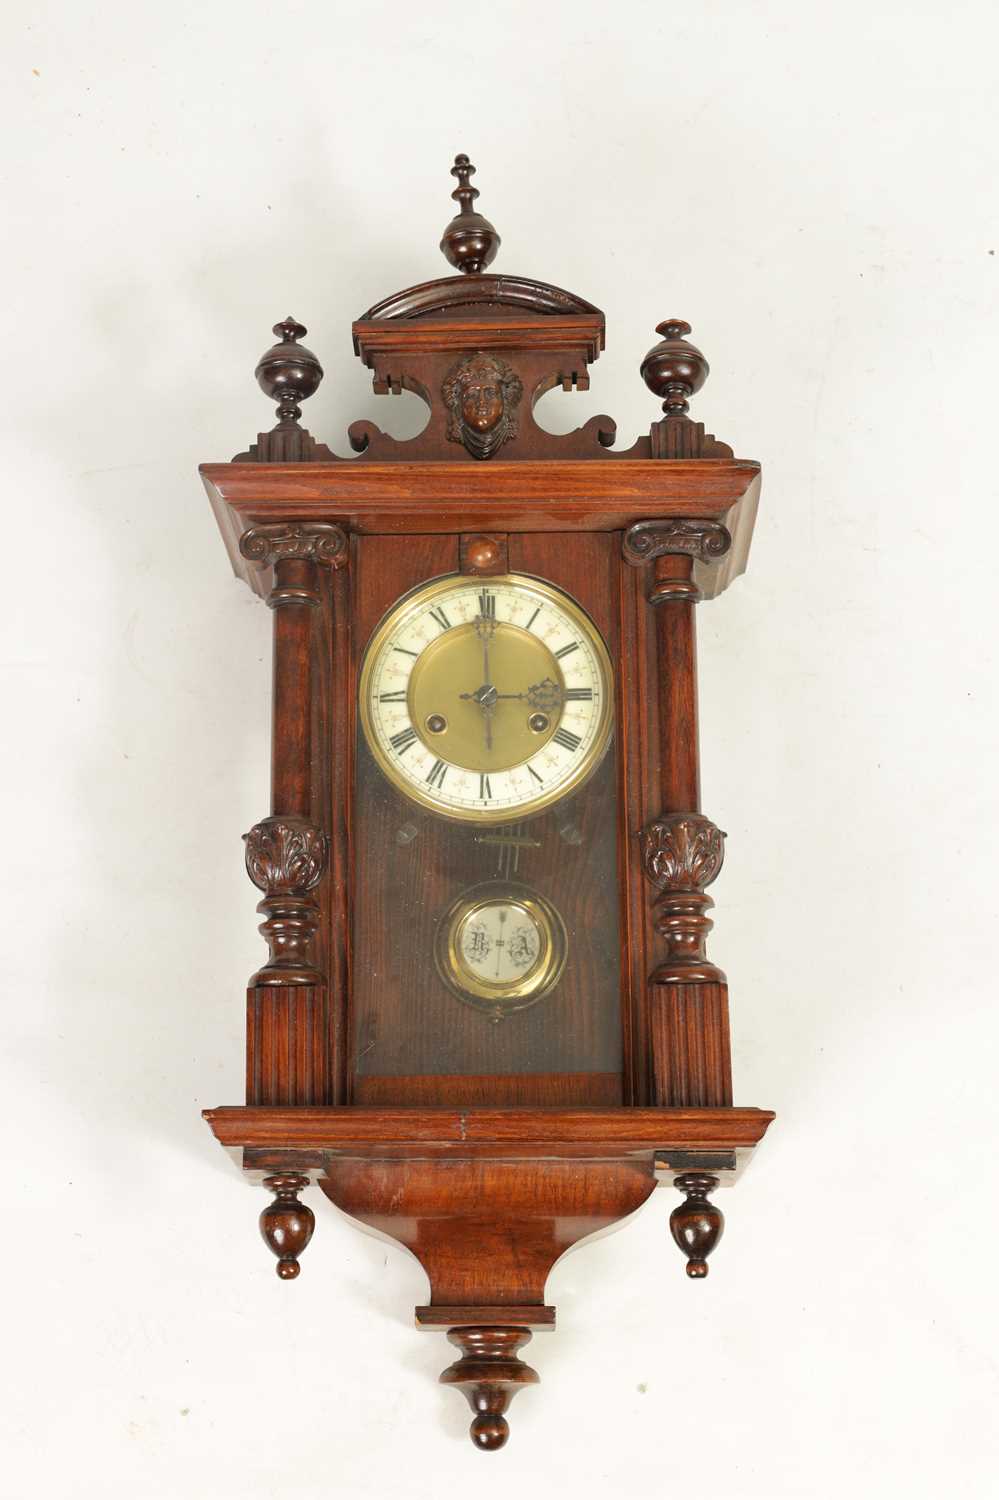 A SMALL 19TH CENTURY VIENNA STYLE WALL CLOCK - Image 2 of 11